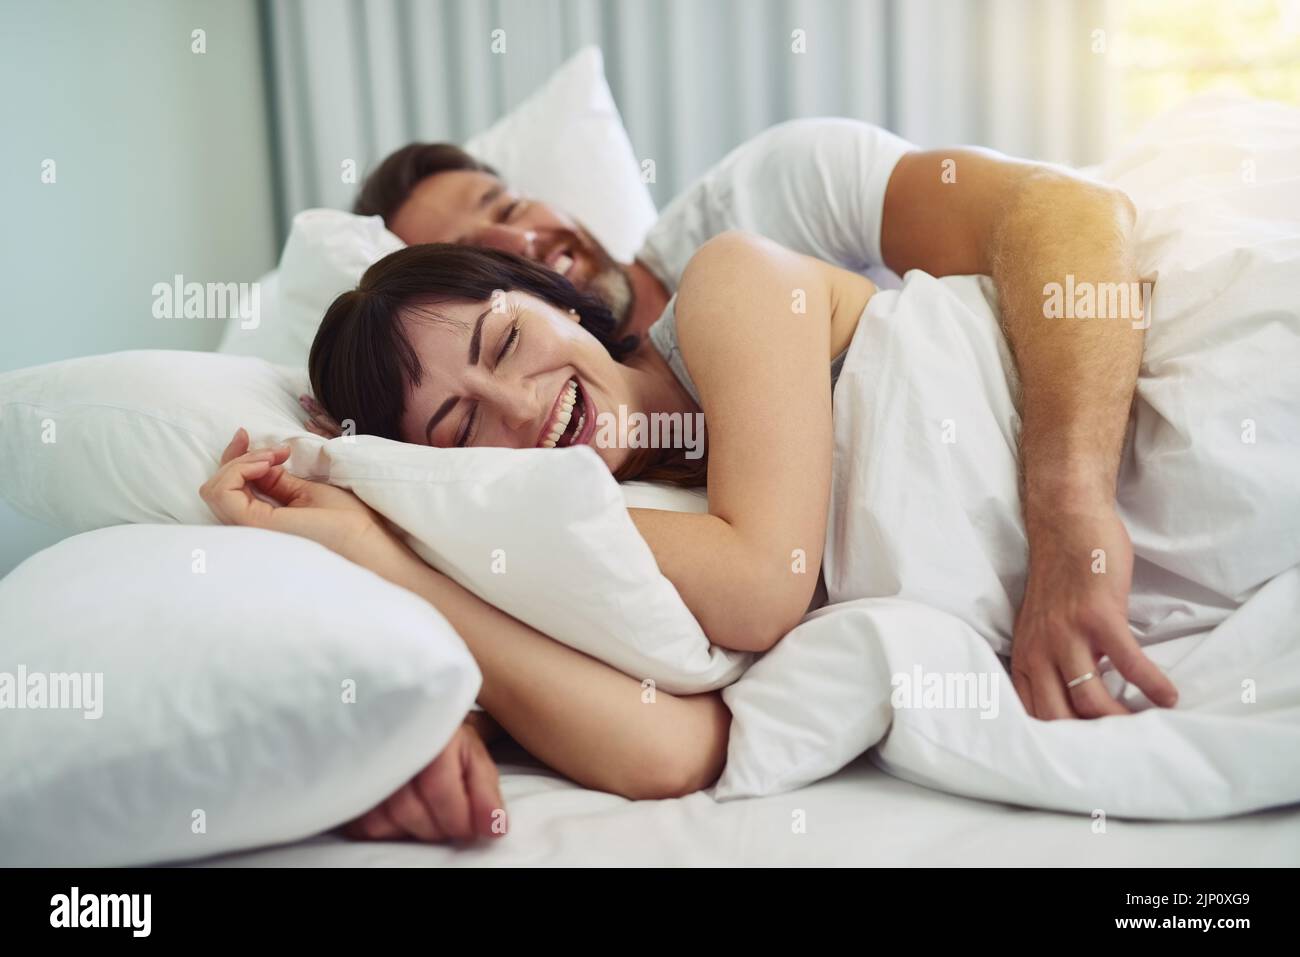 Should we stay in bed a bit longer. a relaxed young couple trying sleeping in each others arms in bed during morning hours. Stock Photo